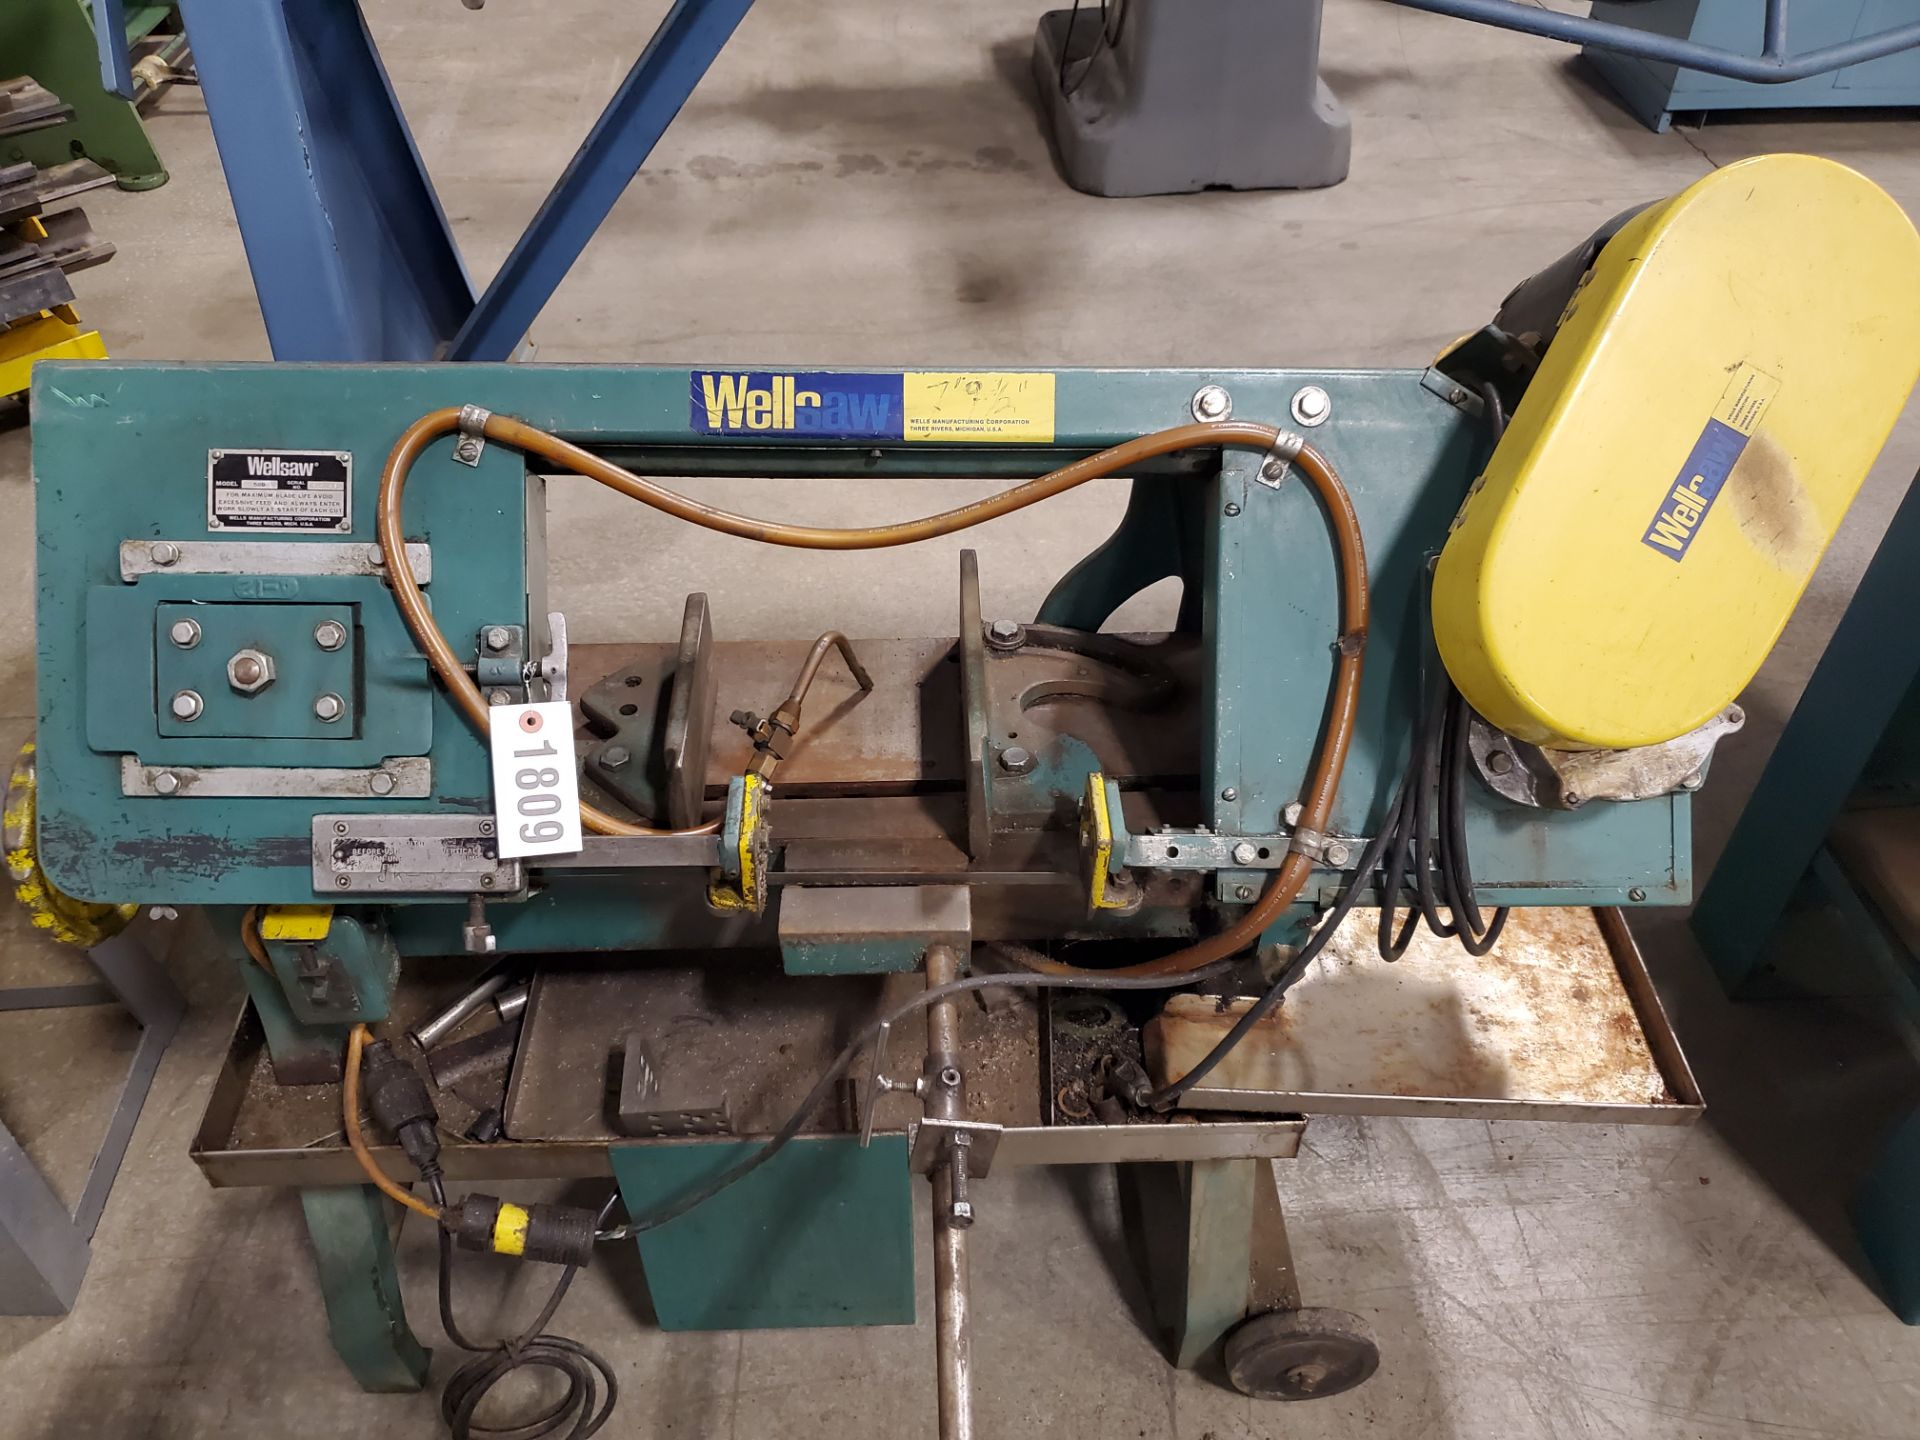 Wellsaw Portable Vertical Band Saw, 8" Throat